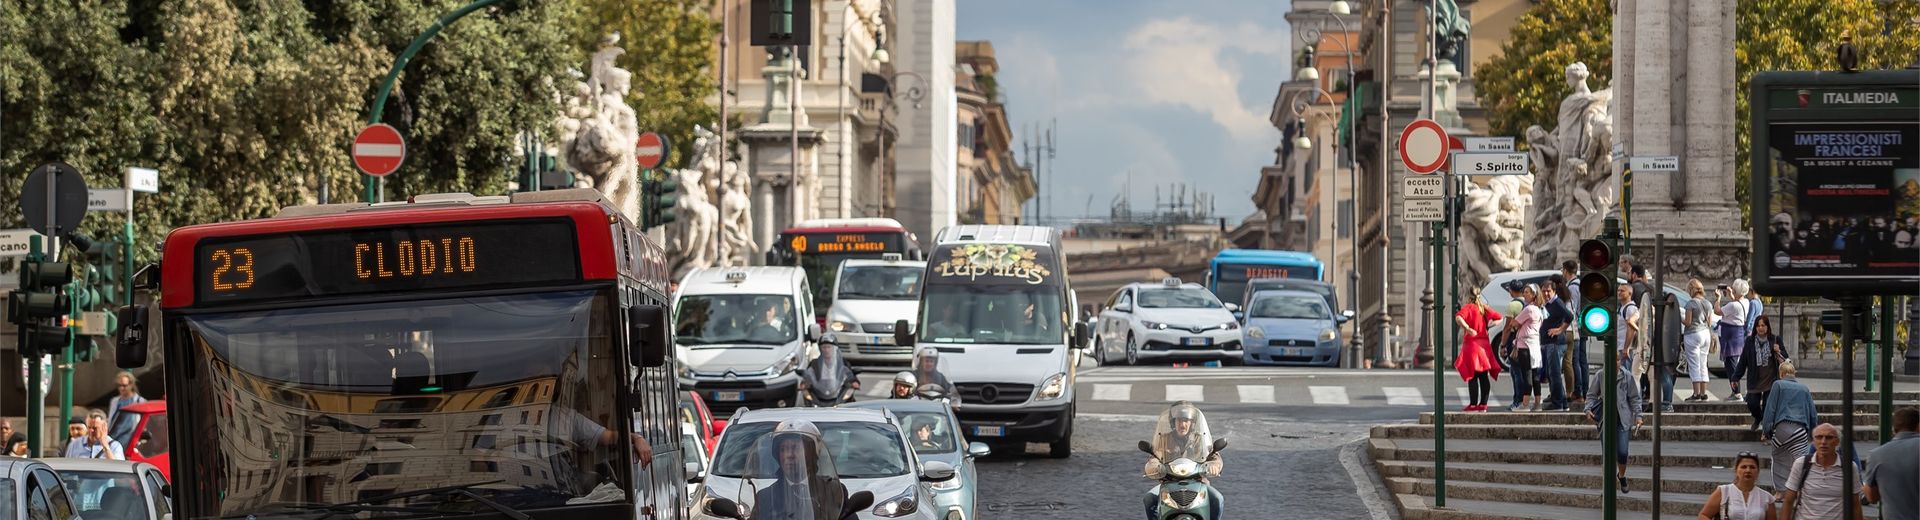 A bus, cars and scooters on a busy street in Rome, Italy.